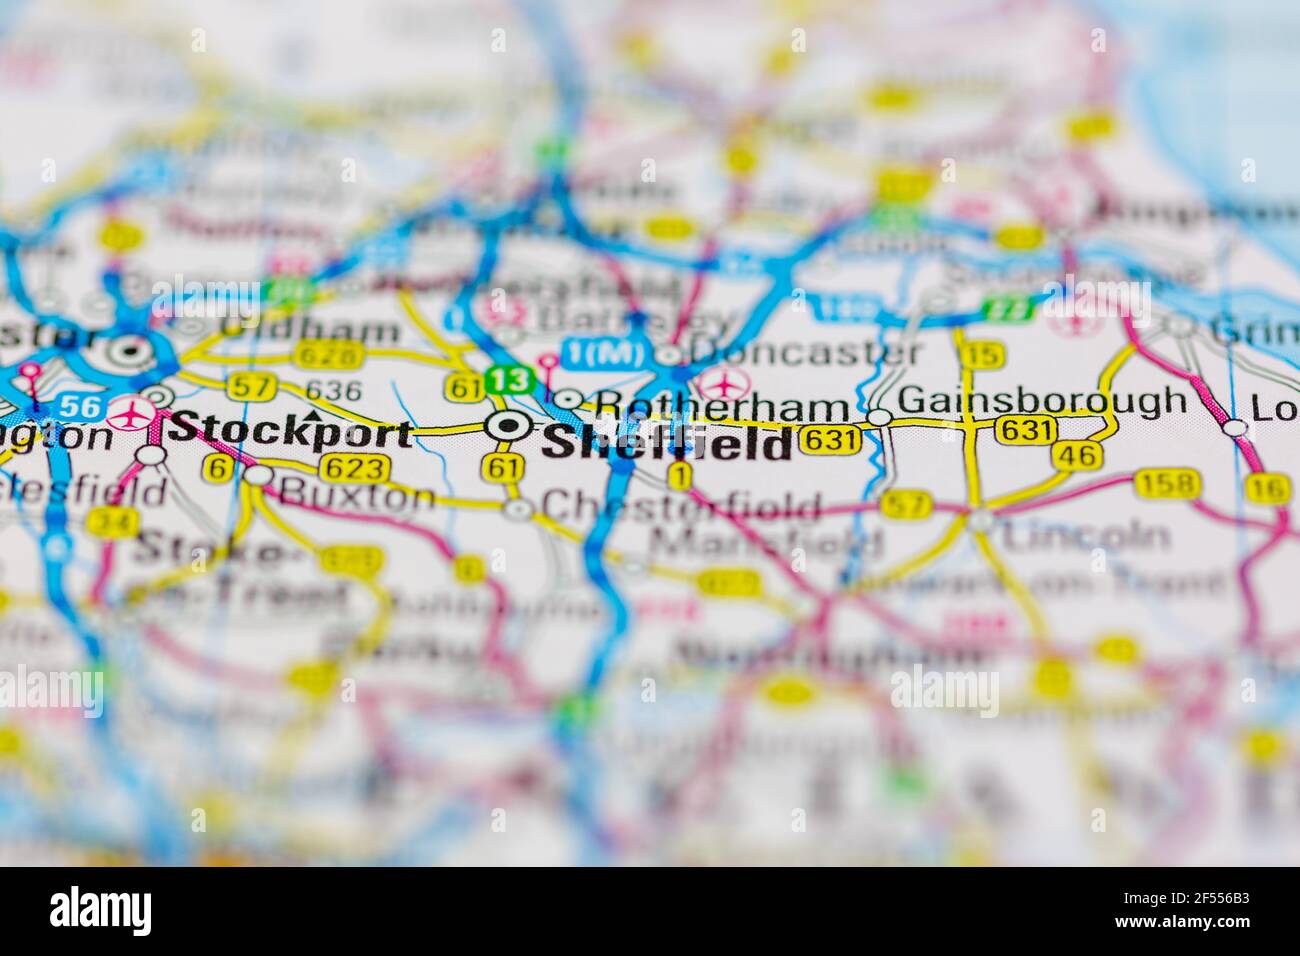 Sheffield Shown on a Geography map or road map Stock Photo